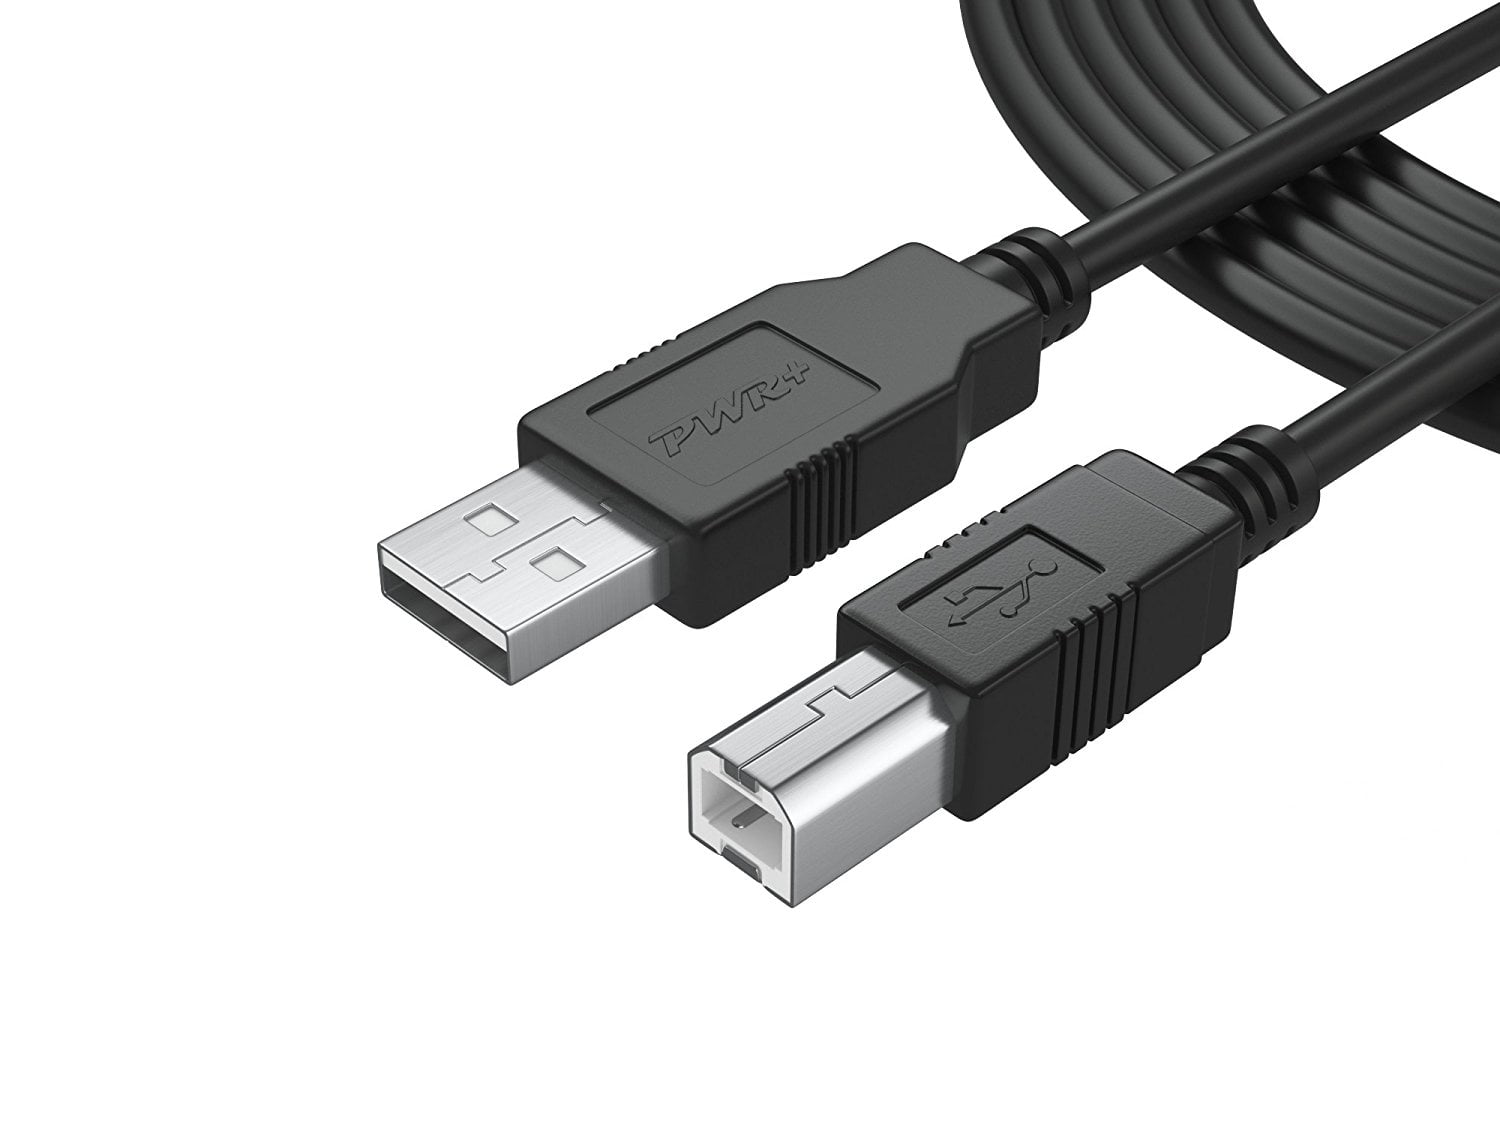 long usb cable